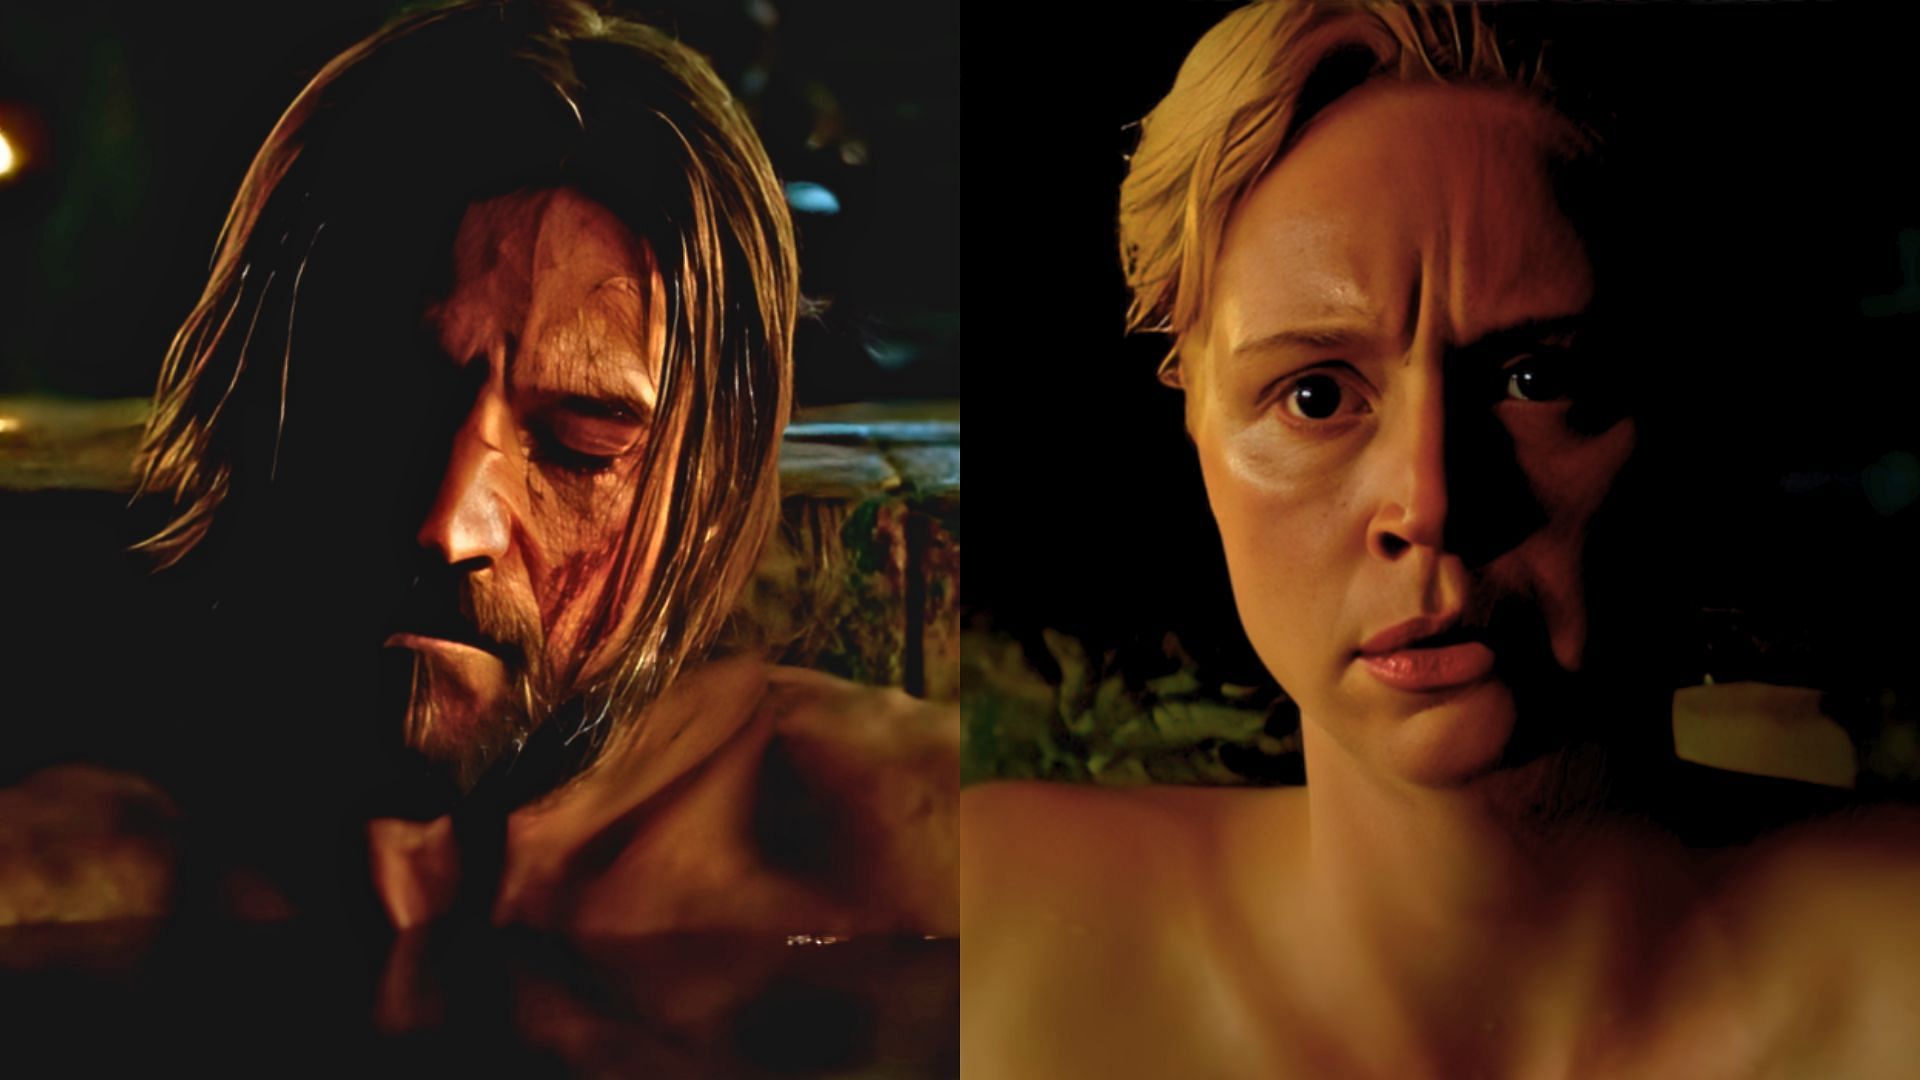 Nikolaj Coster-Waldau portrayed Jaime Lannister (L), while Gwendoline Christie played Brienne of Tarth (R) in Game of Thrones (Image via YouTube/HBO 2:50 and 3:58)